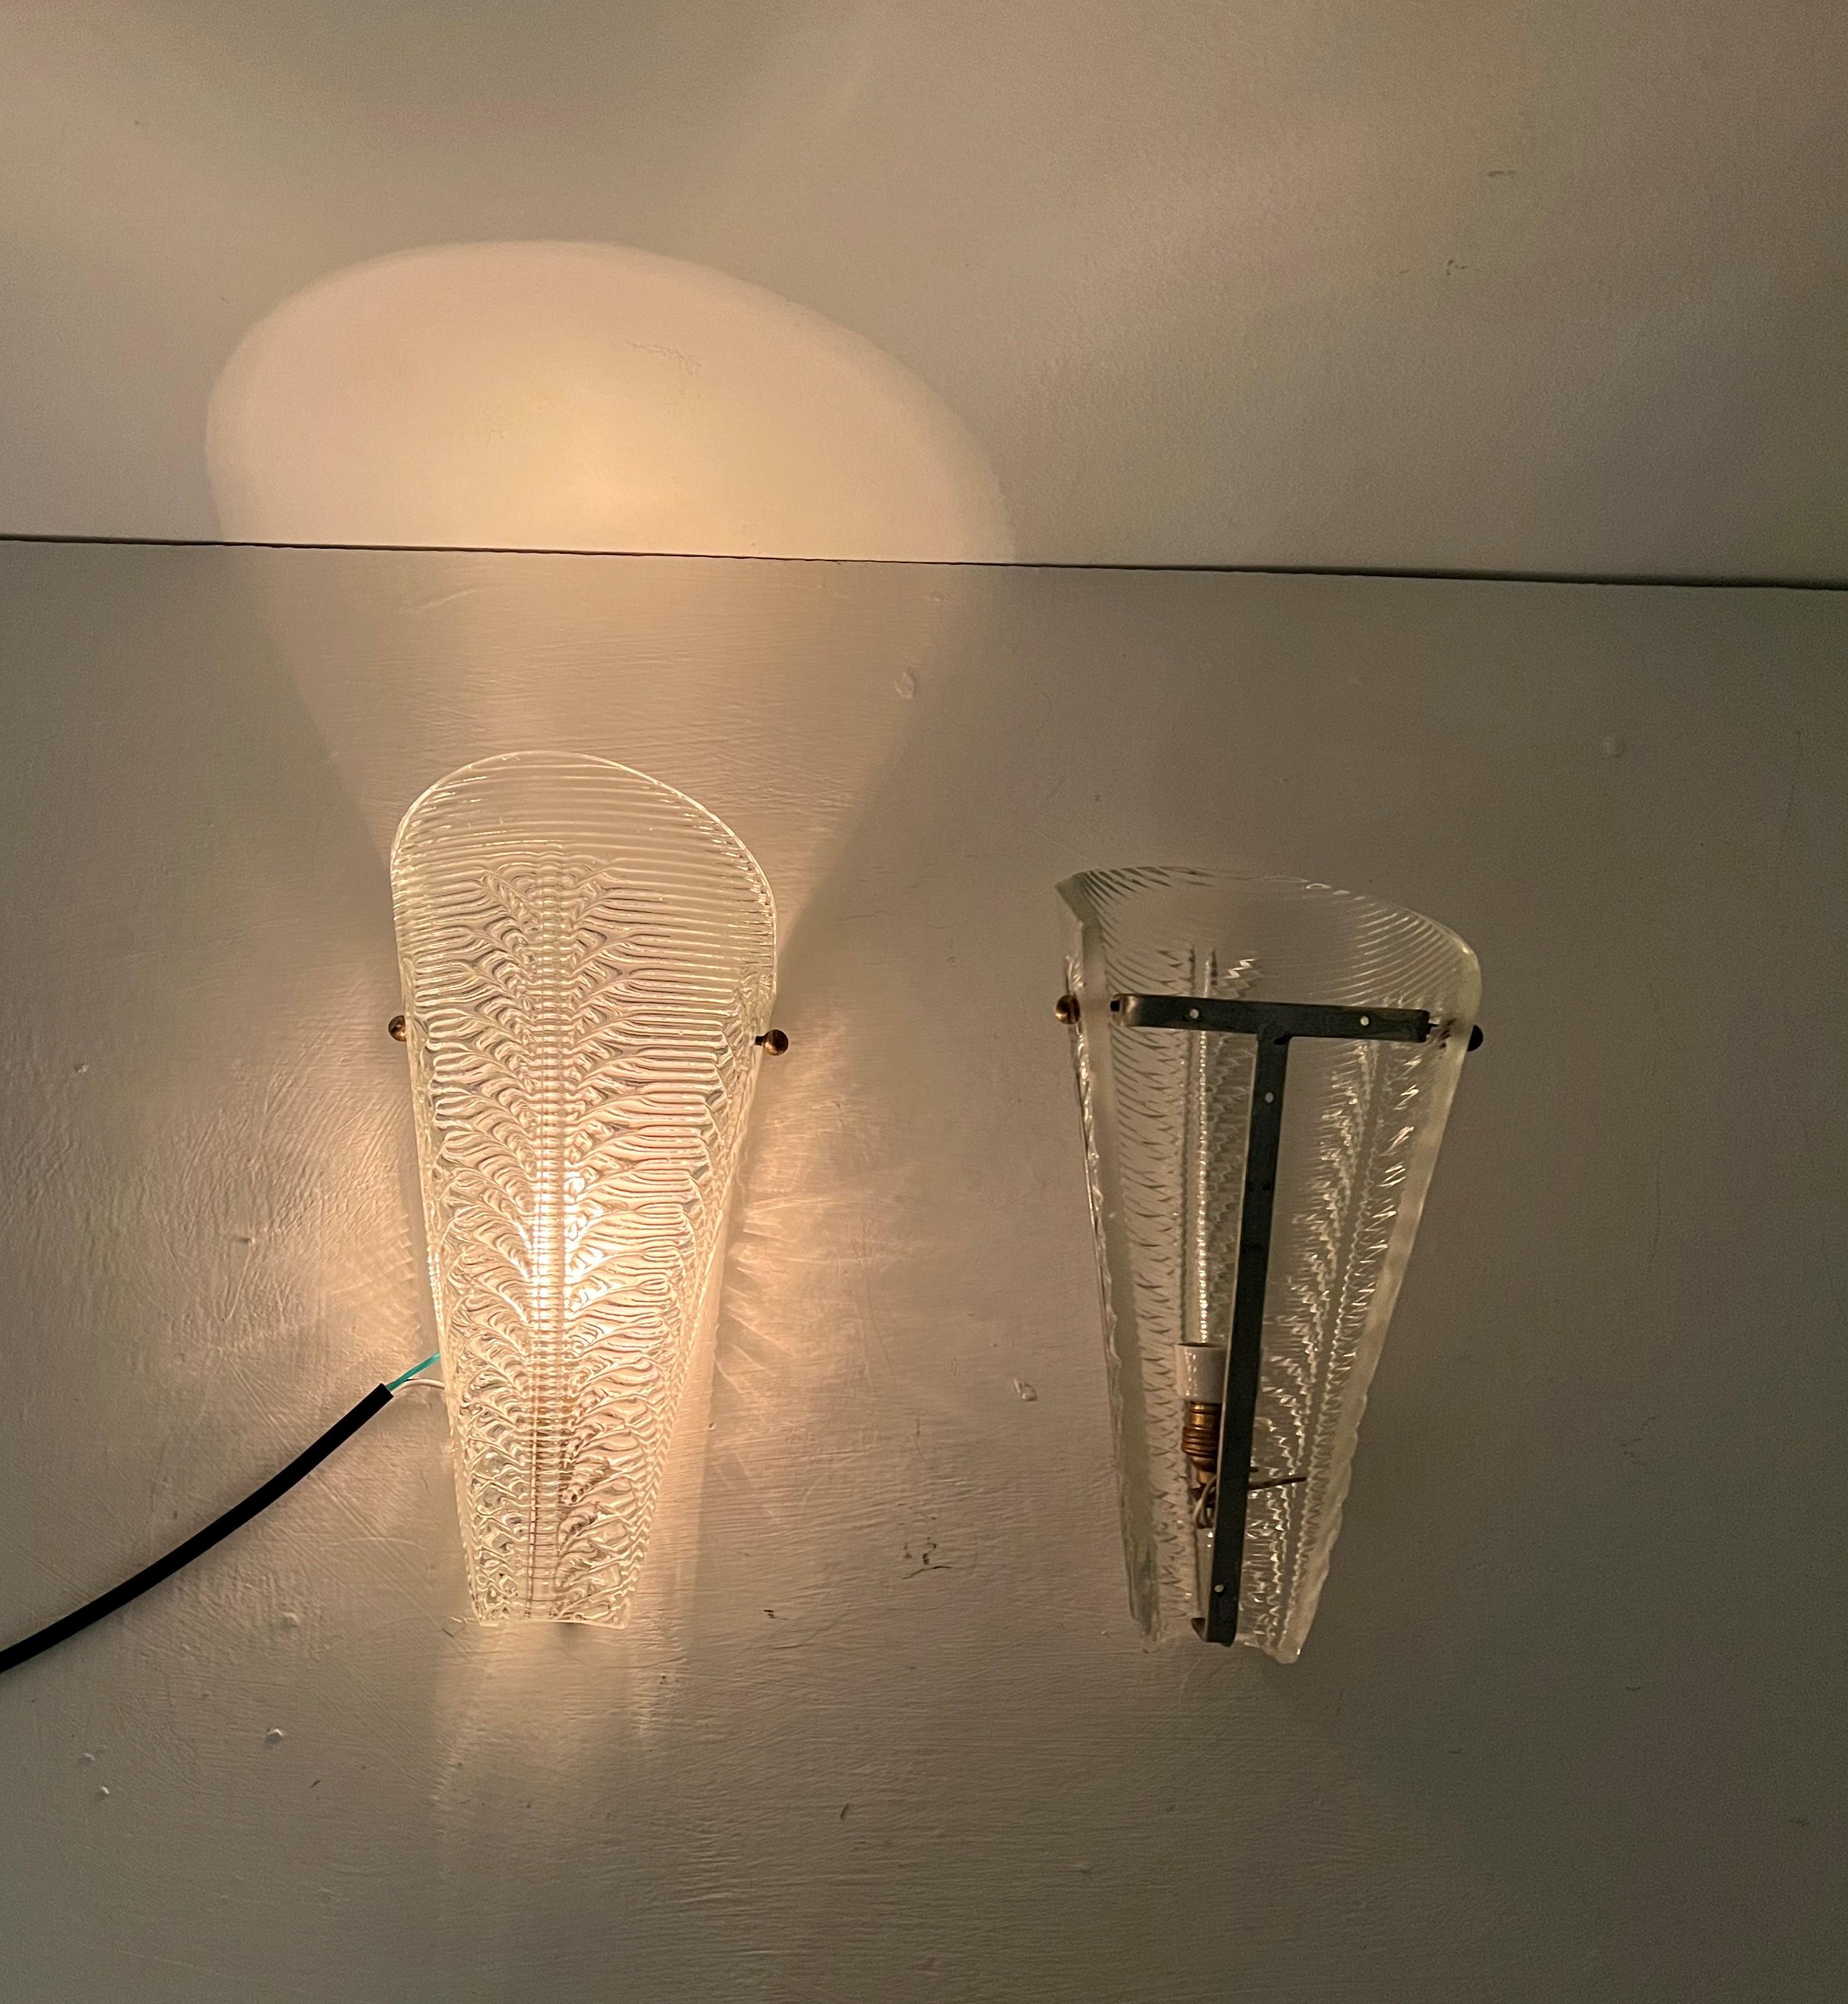 Pair of Art Deco Sconces, circa 1940 by Seguso in Murano Glass, Italy, 1940s For Sale 1